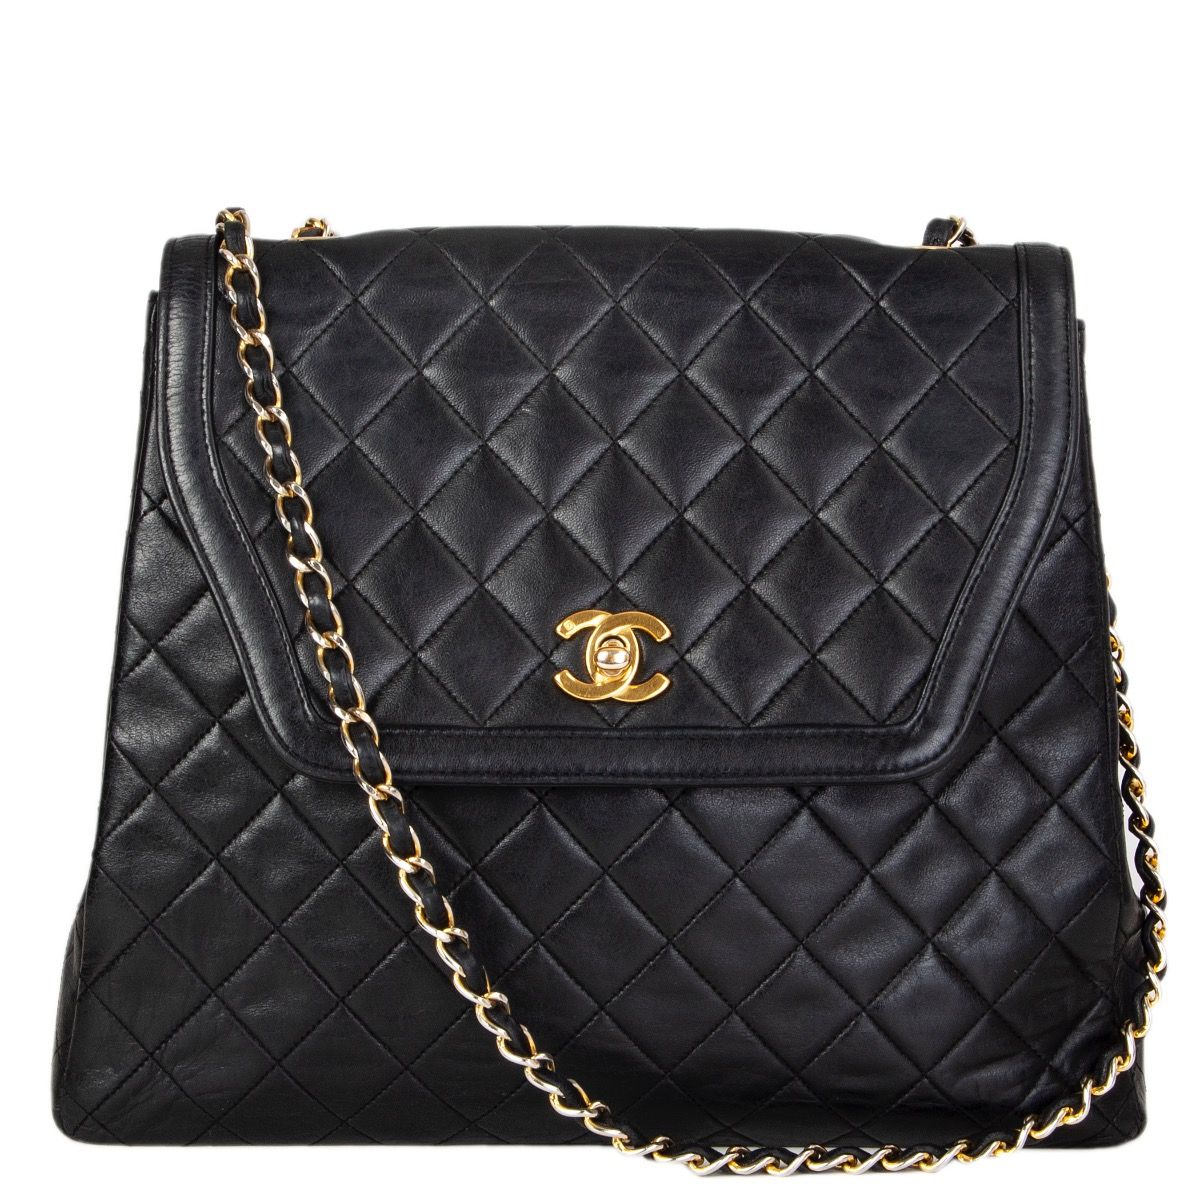 Chanel Vintage Trapeze Quilted Flap Bag